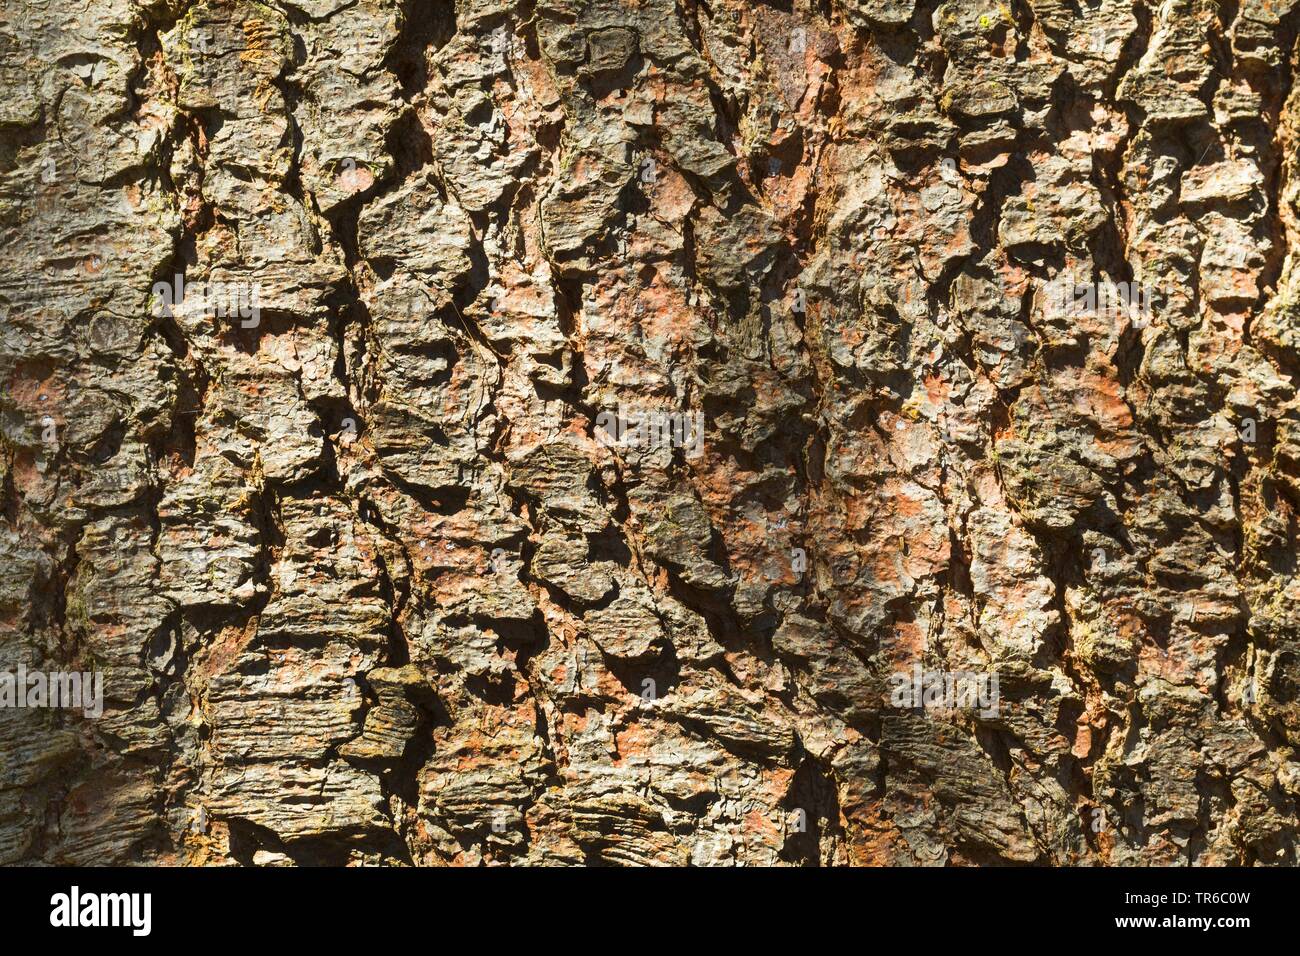 Norway spruce (Picea abies), bark, Germany Stock Photo